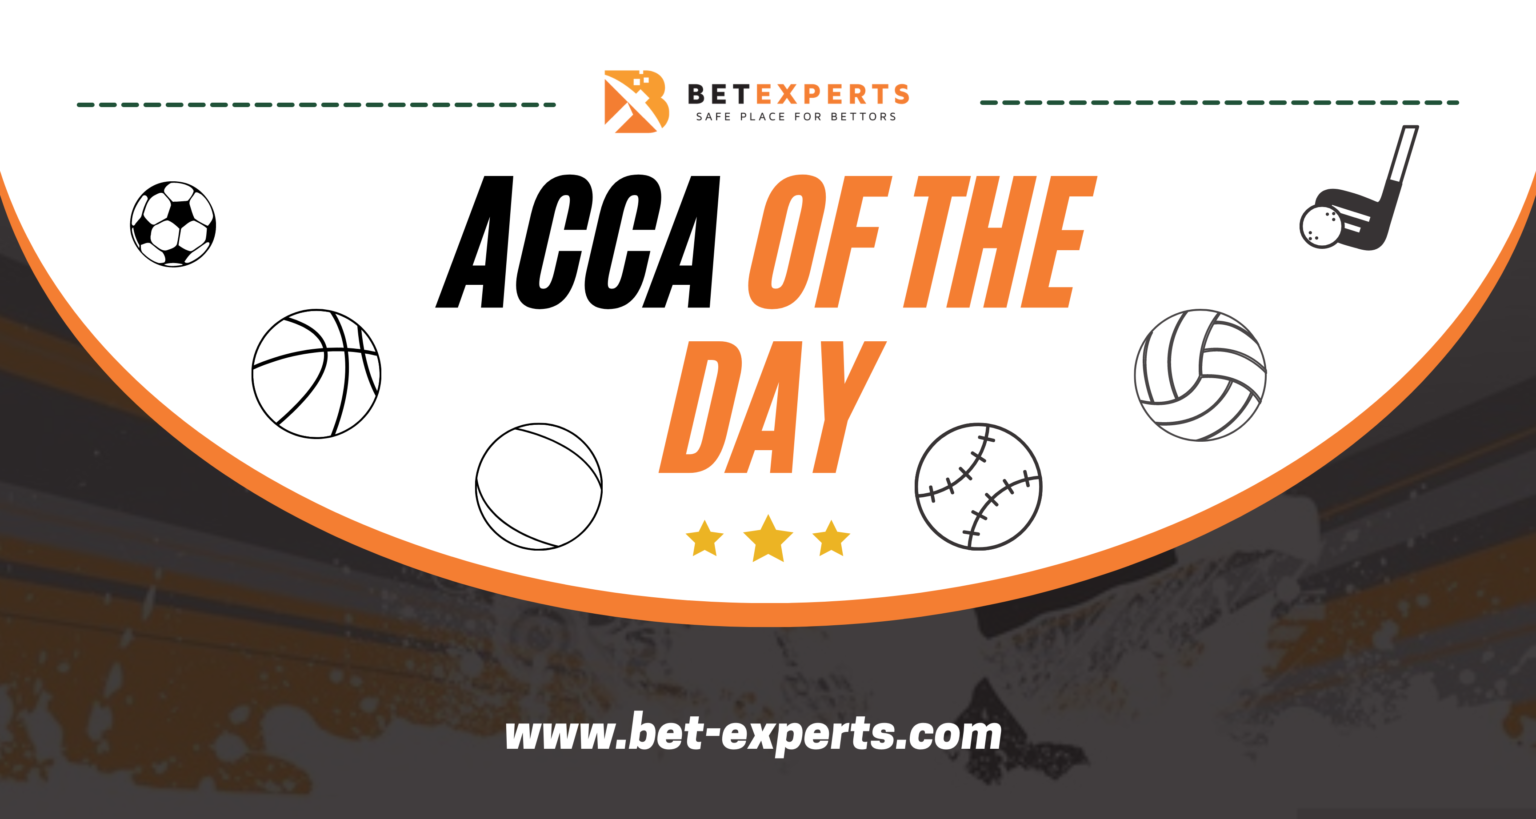 2022 World Cup daily acca: Best bets for Friday's matches 02 12 22